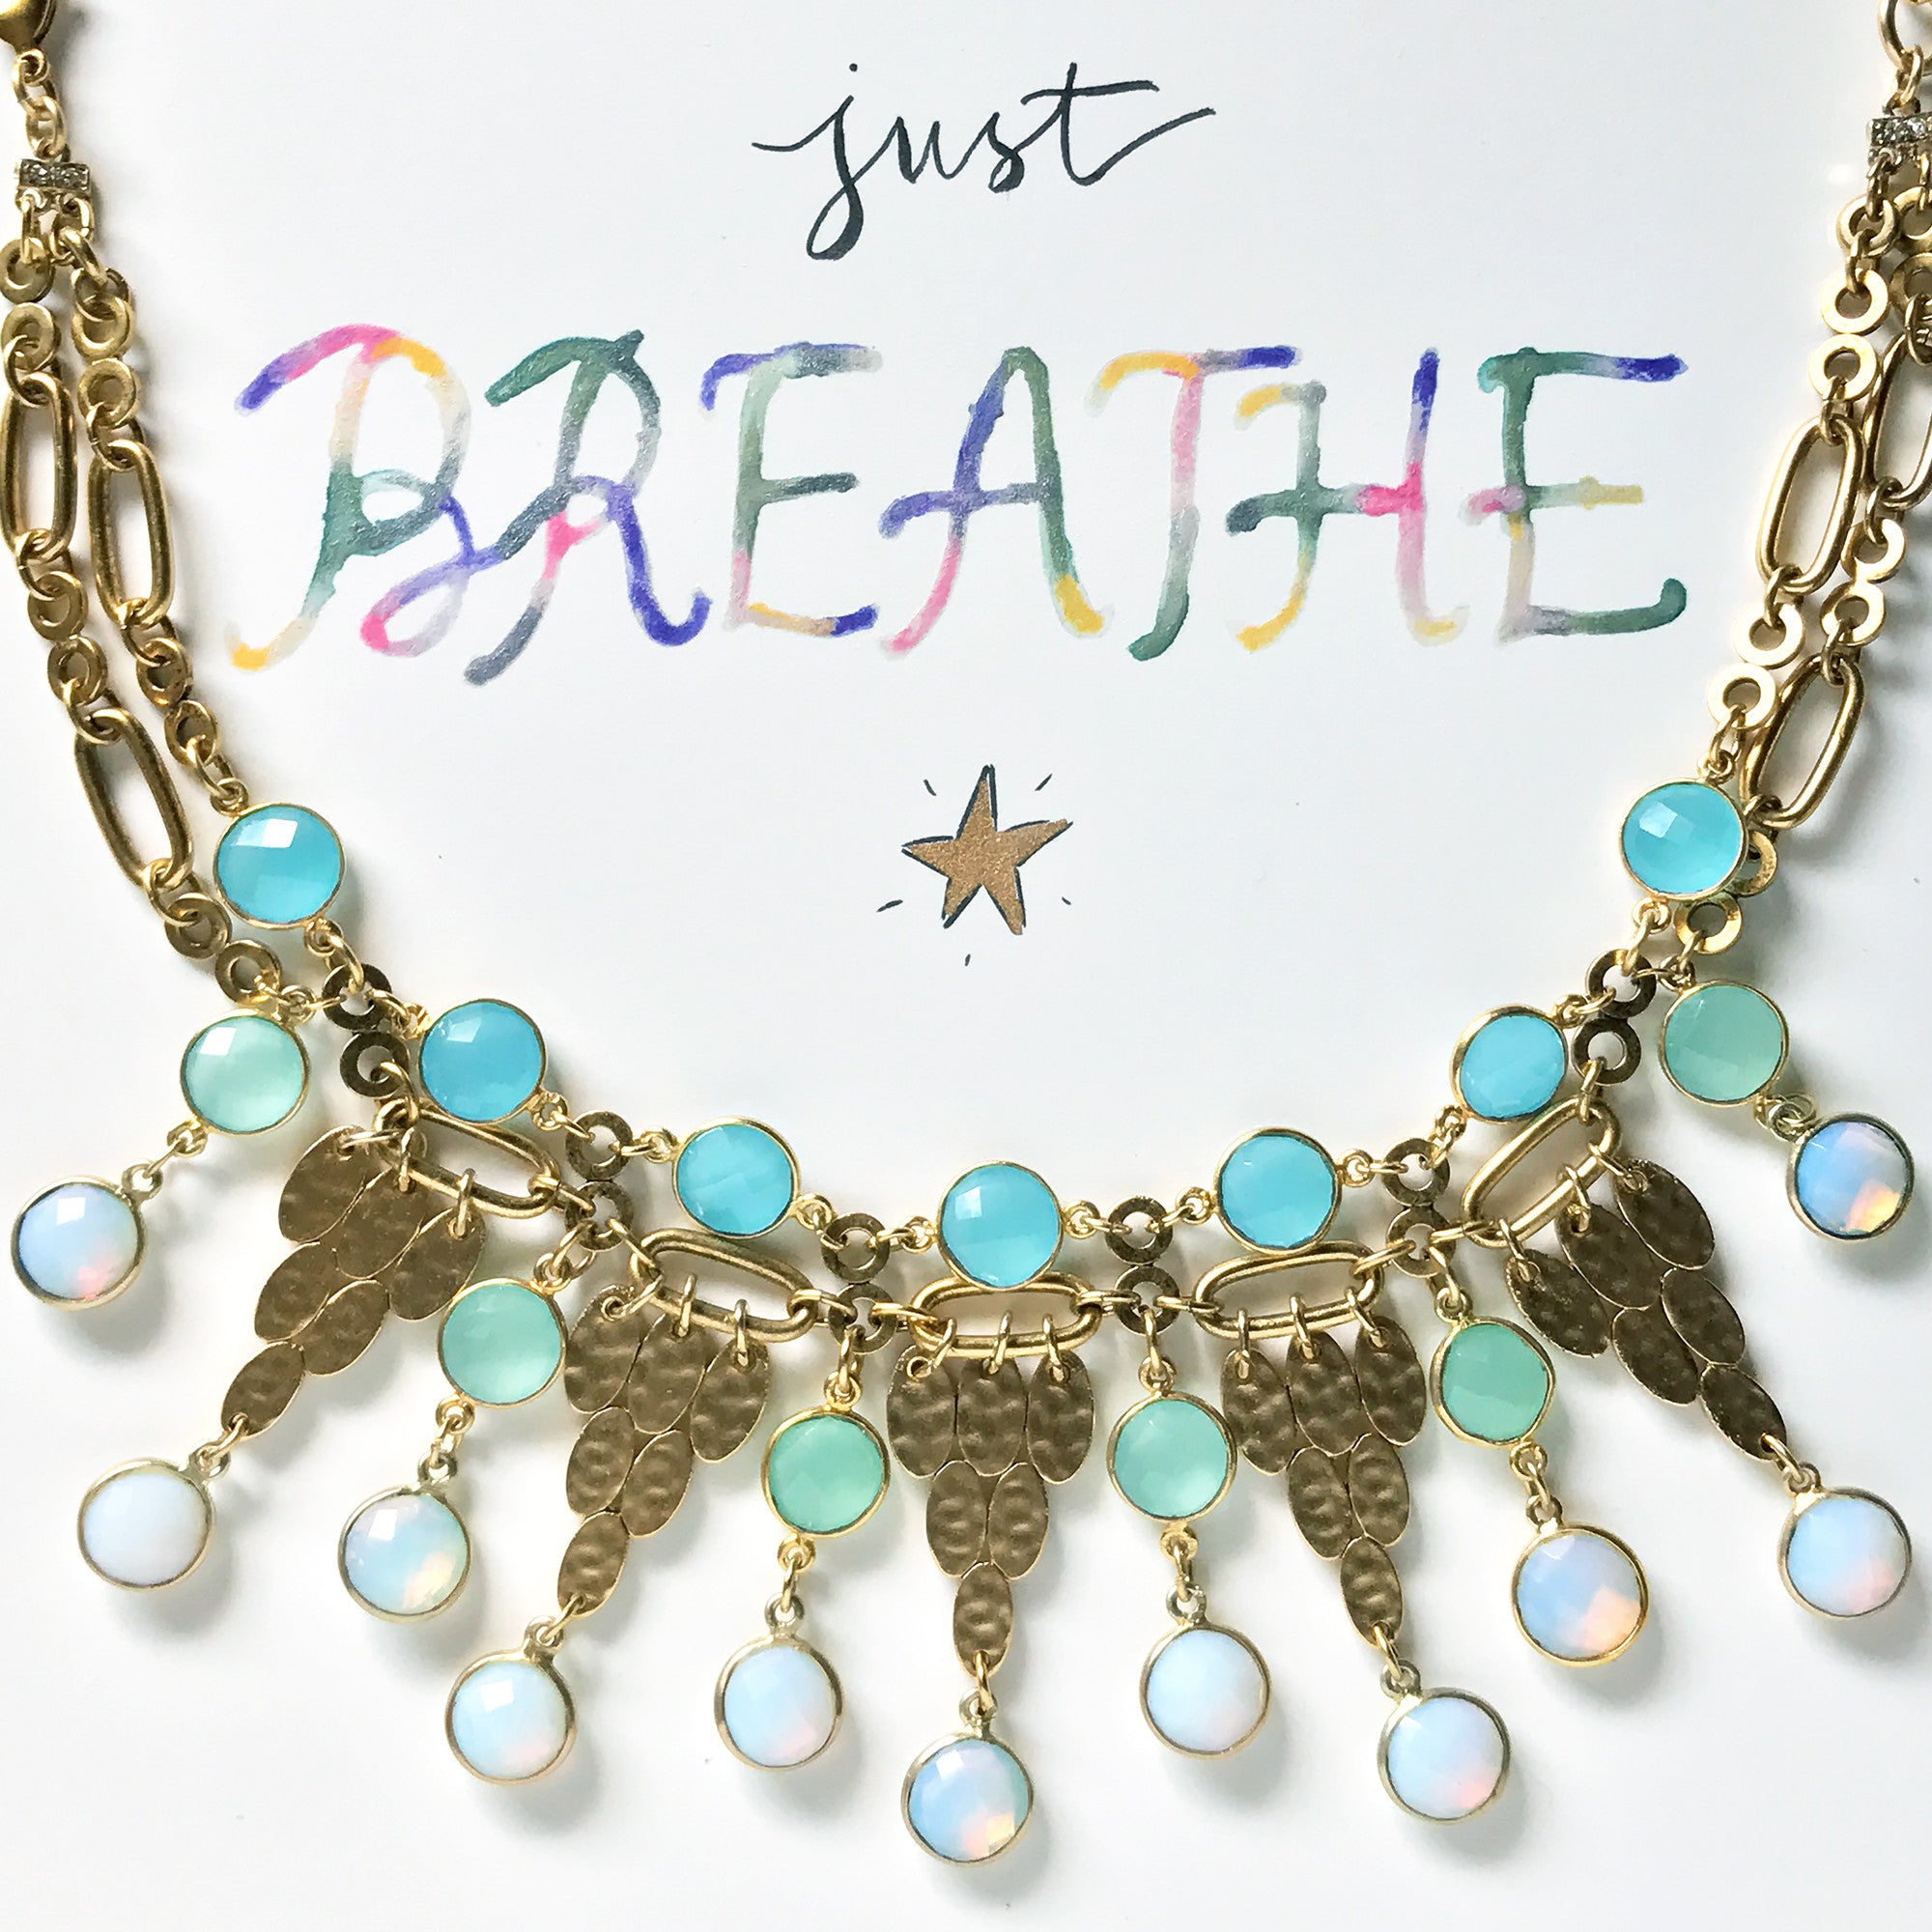 #SequinSayings - Just Breathe...